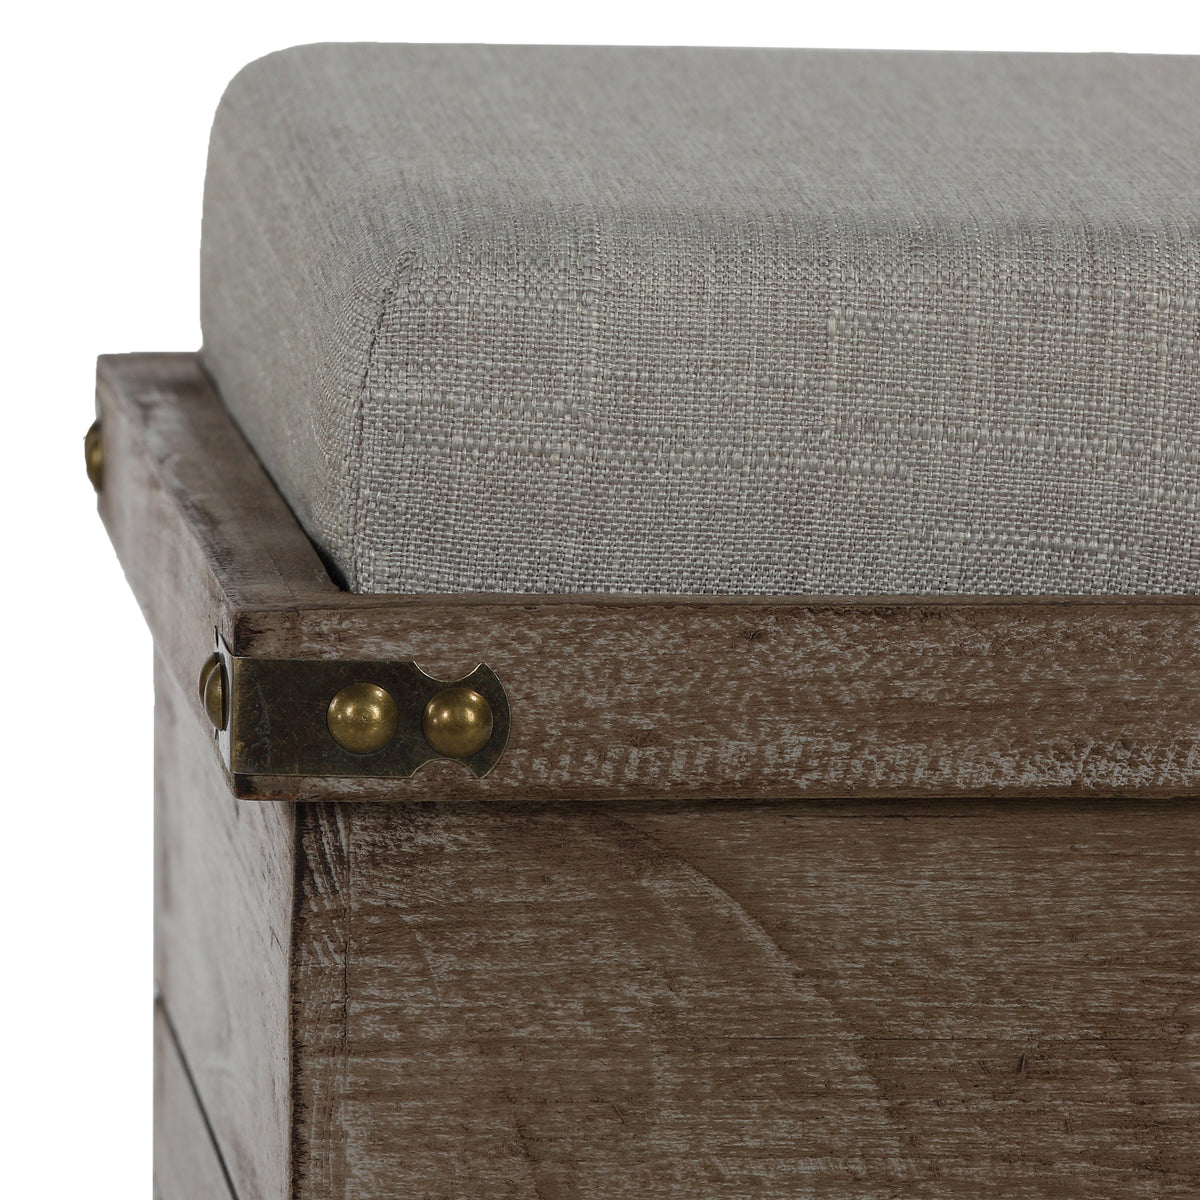 Cortesi Home Scusset Storage Chest Tray Ottoman in Fabric and Wood, Grey